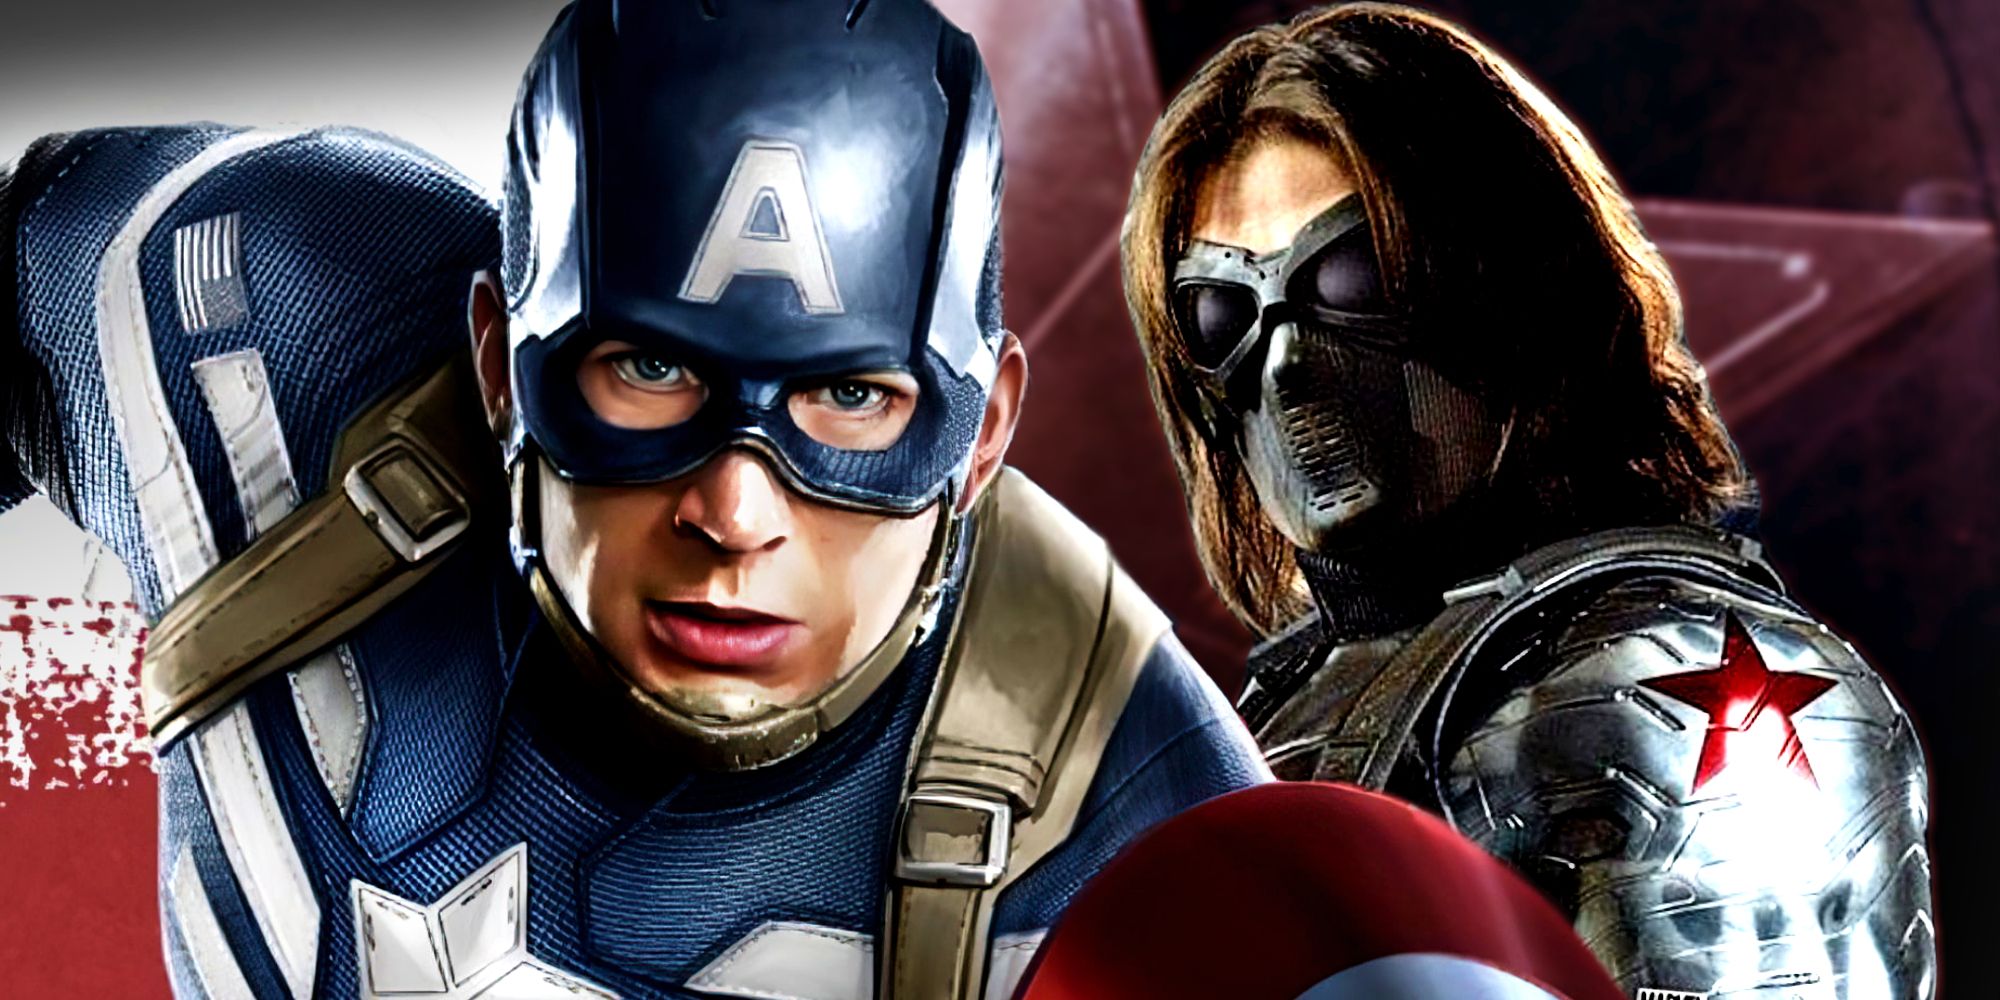 Steve Rogers Heads into Battle and Bucky Barnes Wears his Mask in Captain America The Winter Soldier